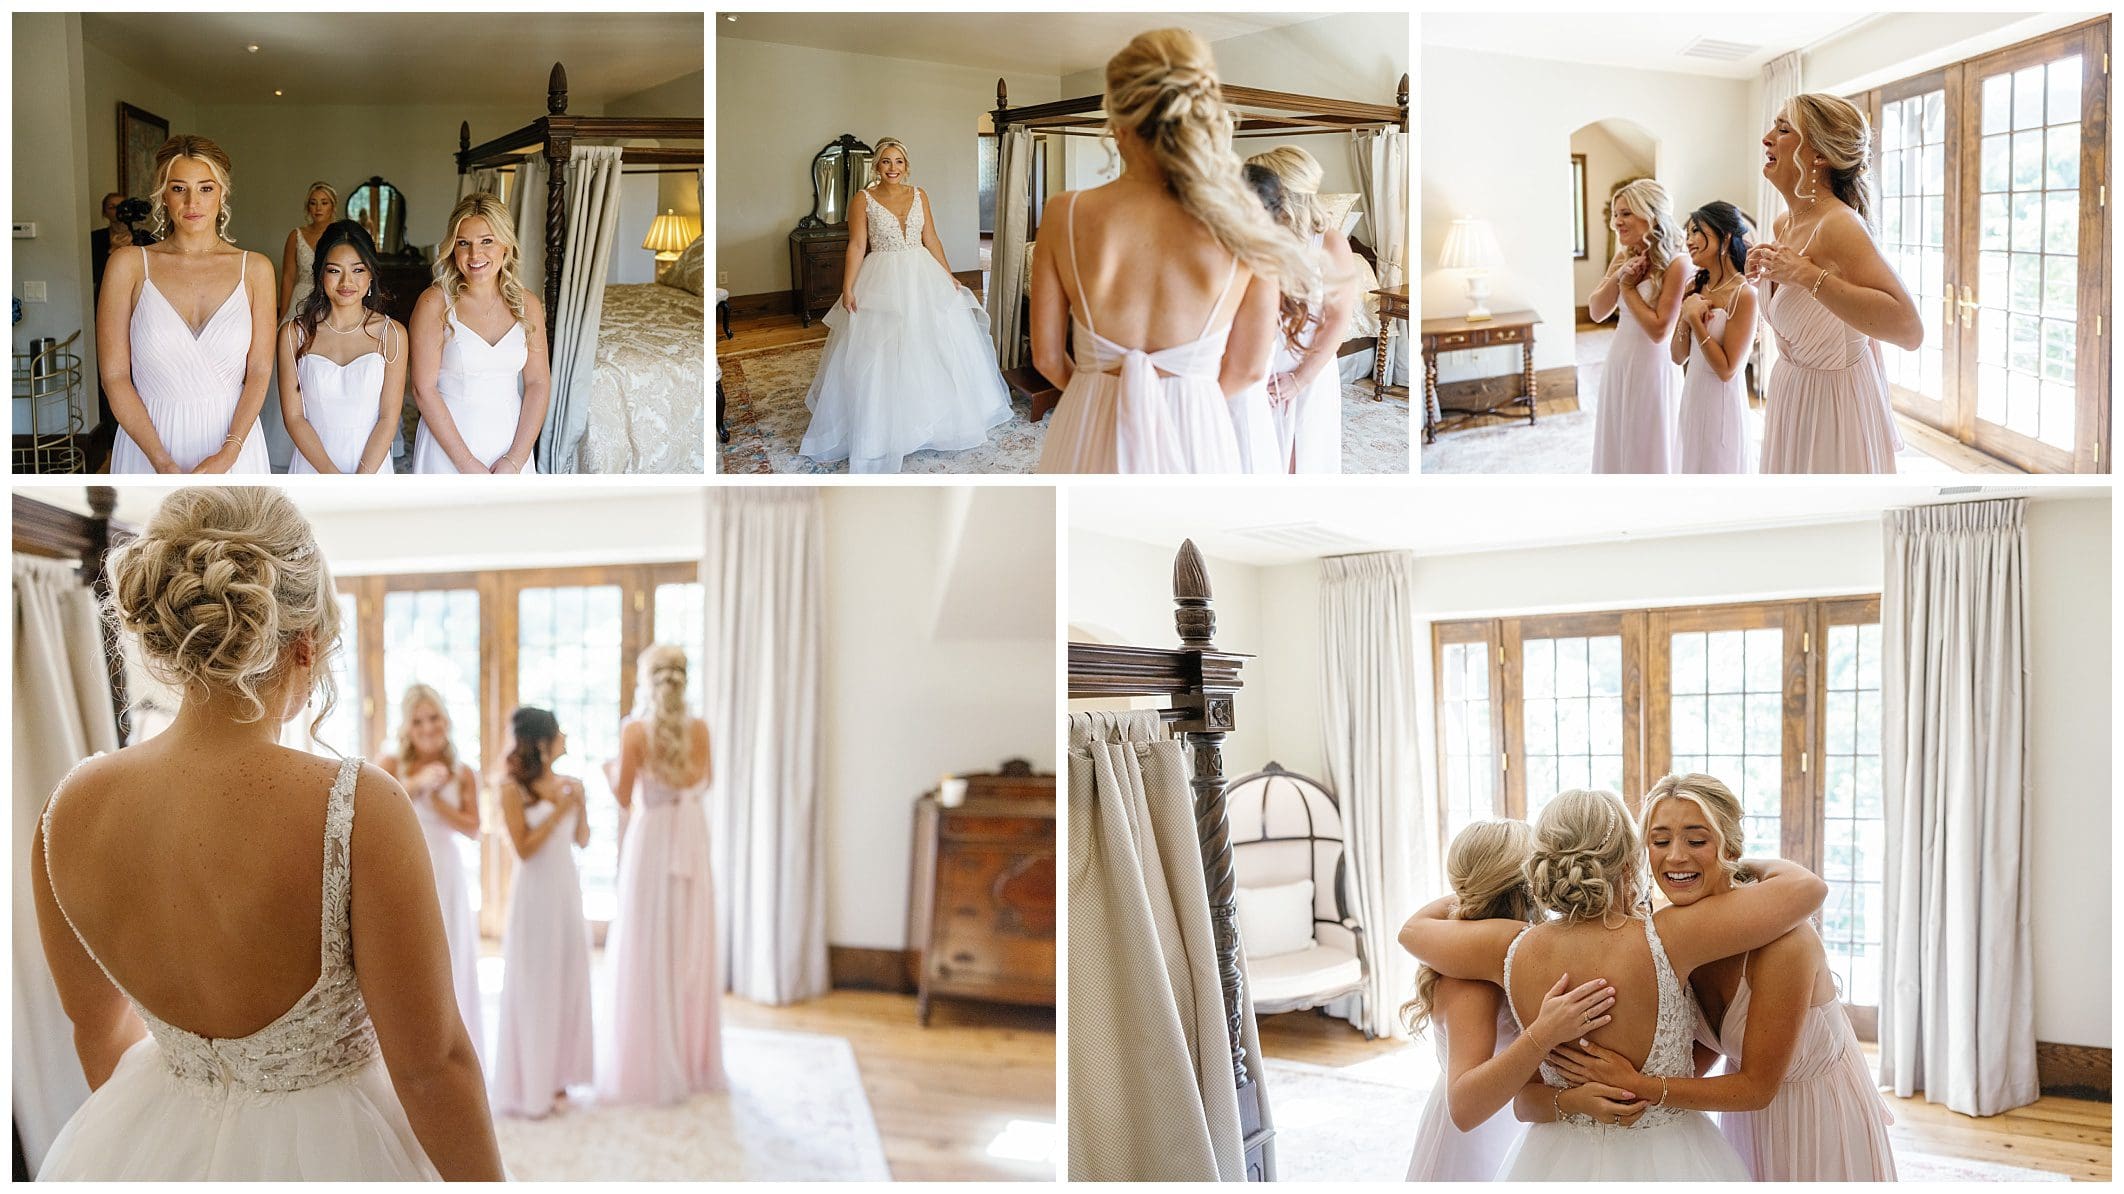 A bride and her bridesmaids are getting ready for their wedding.